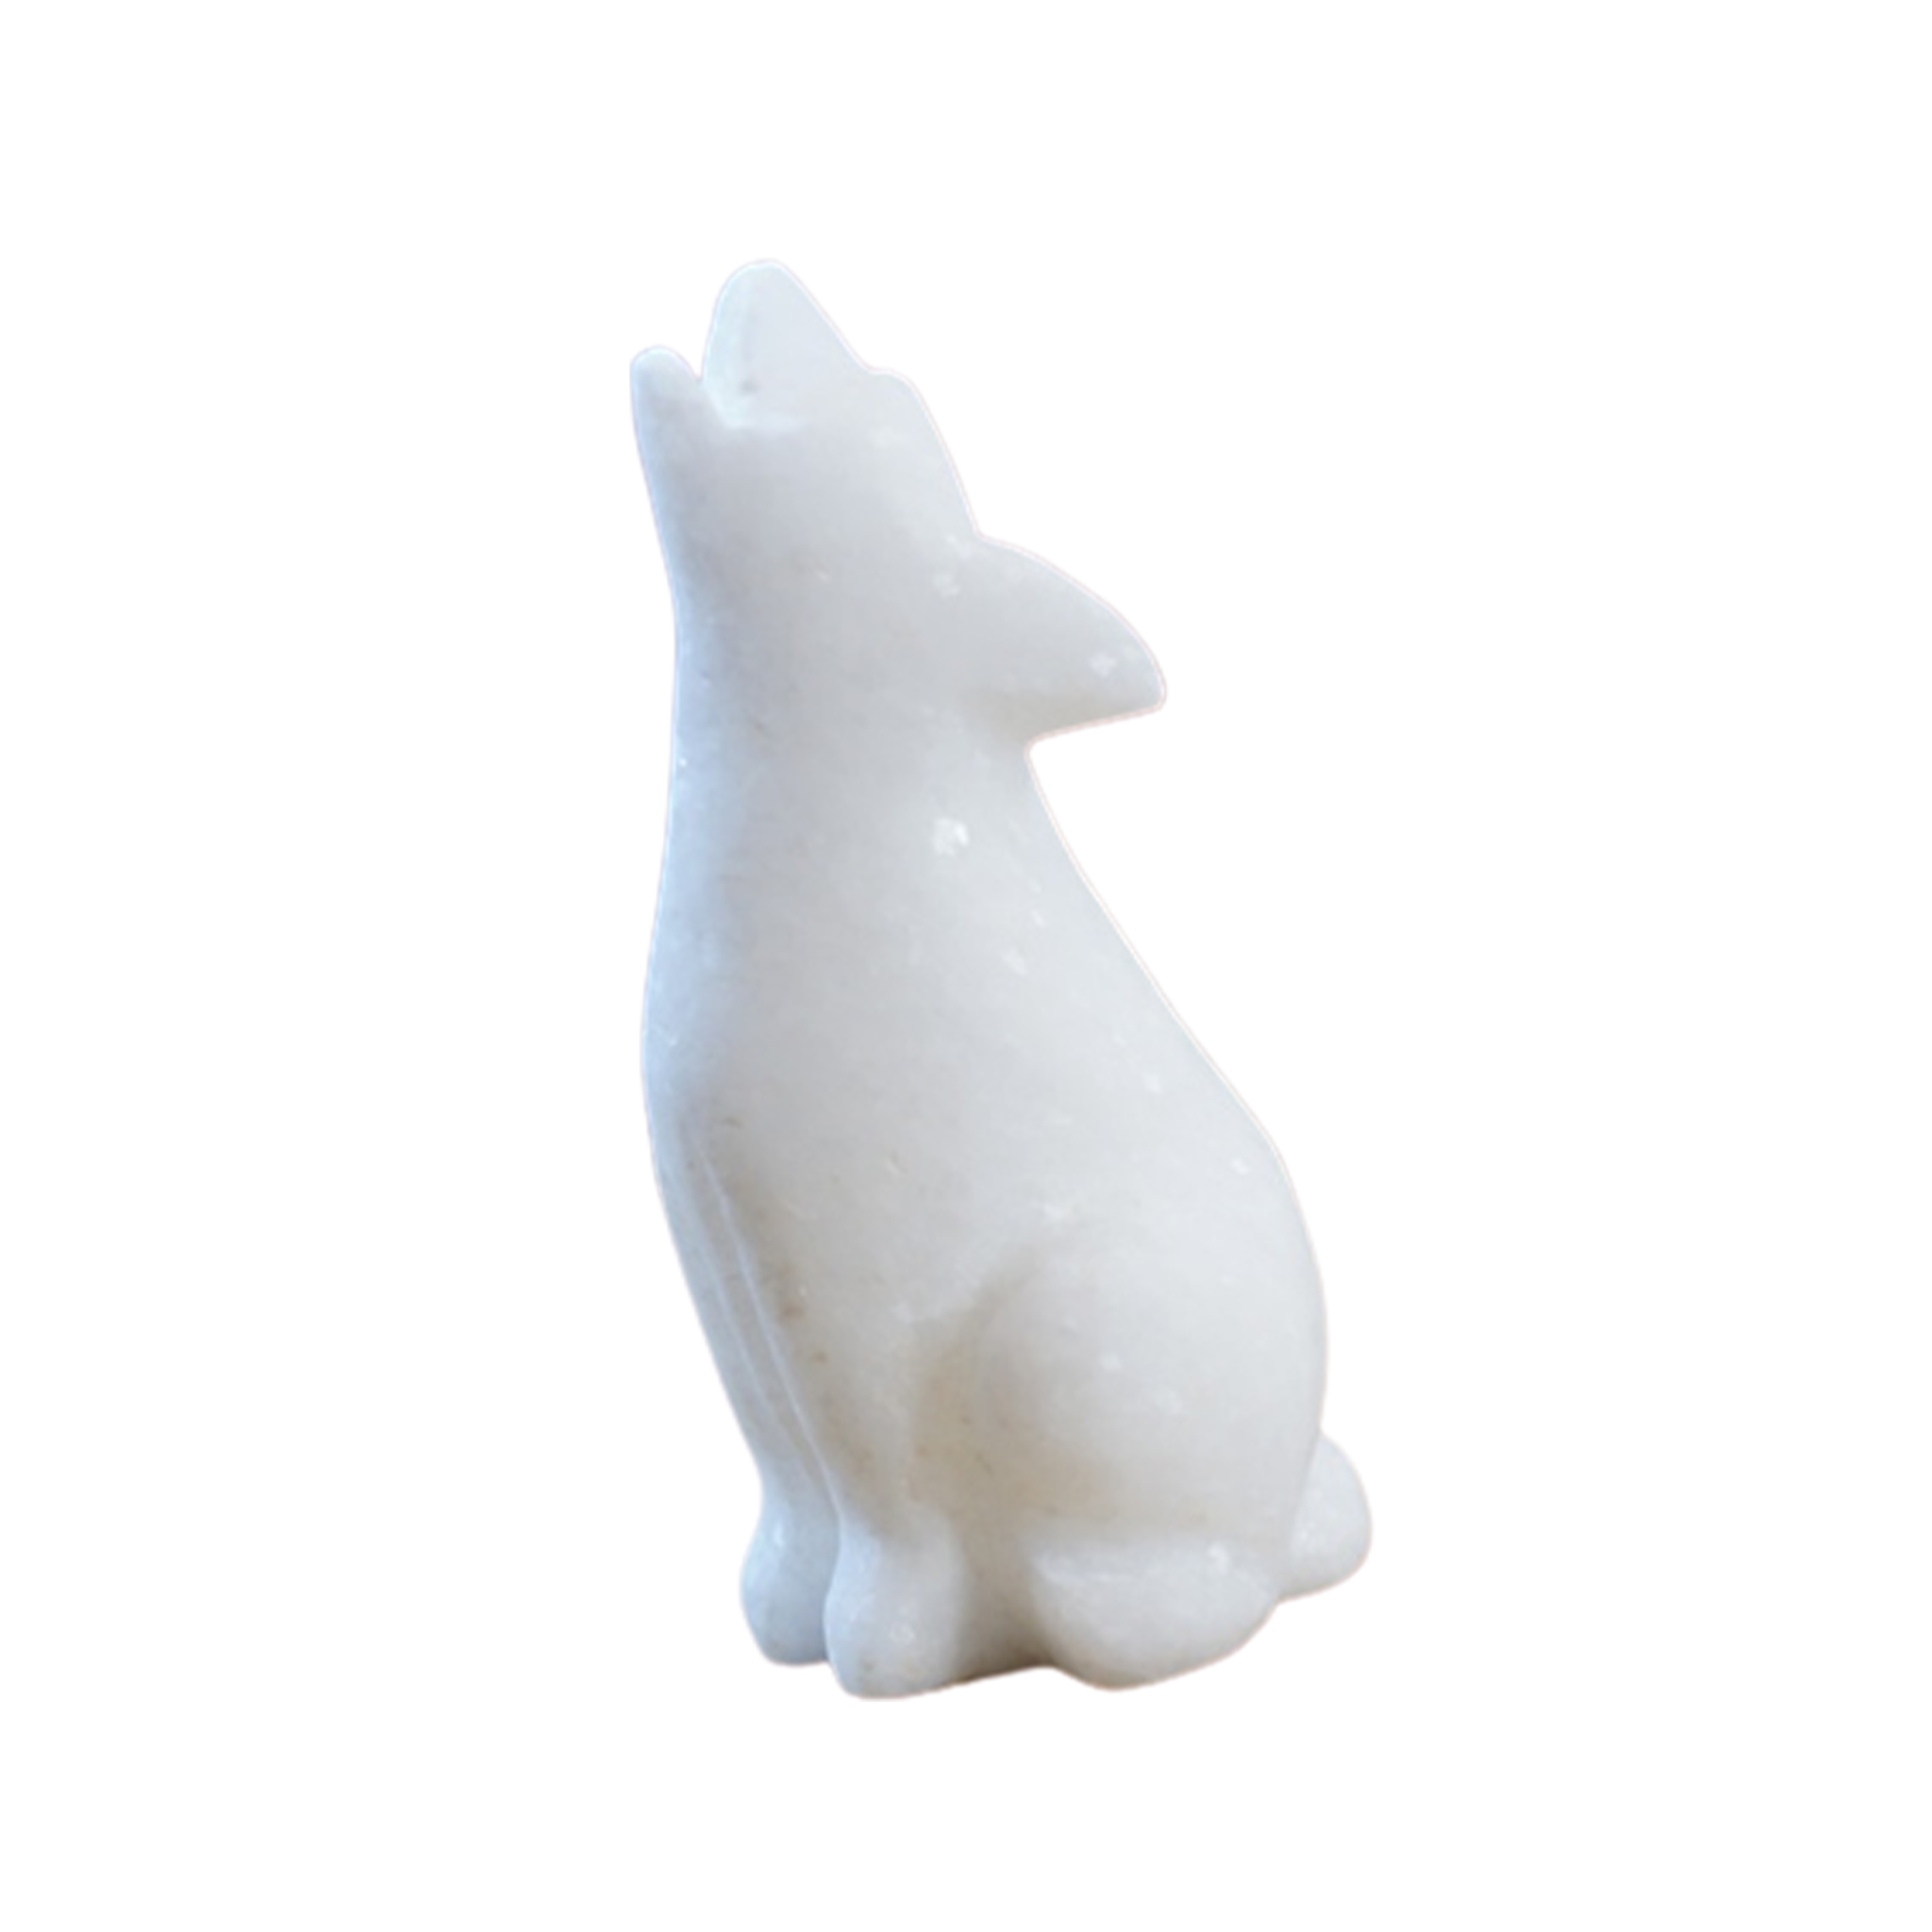 STAR MARBLE Howling Wolf, 3"